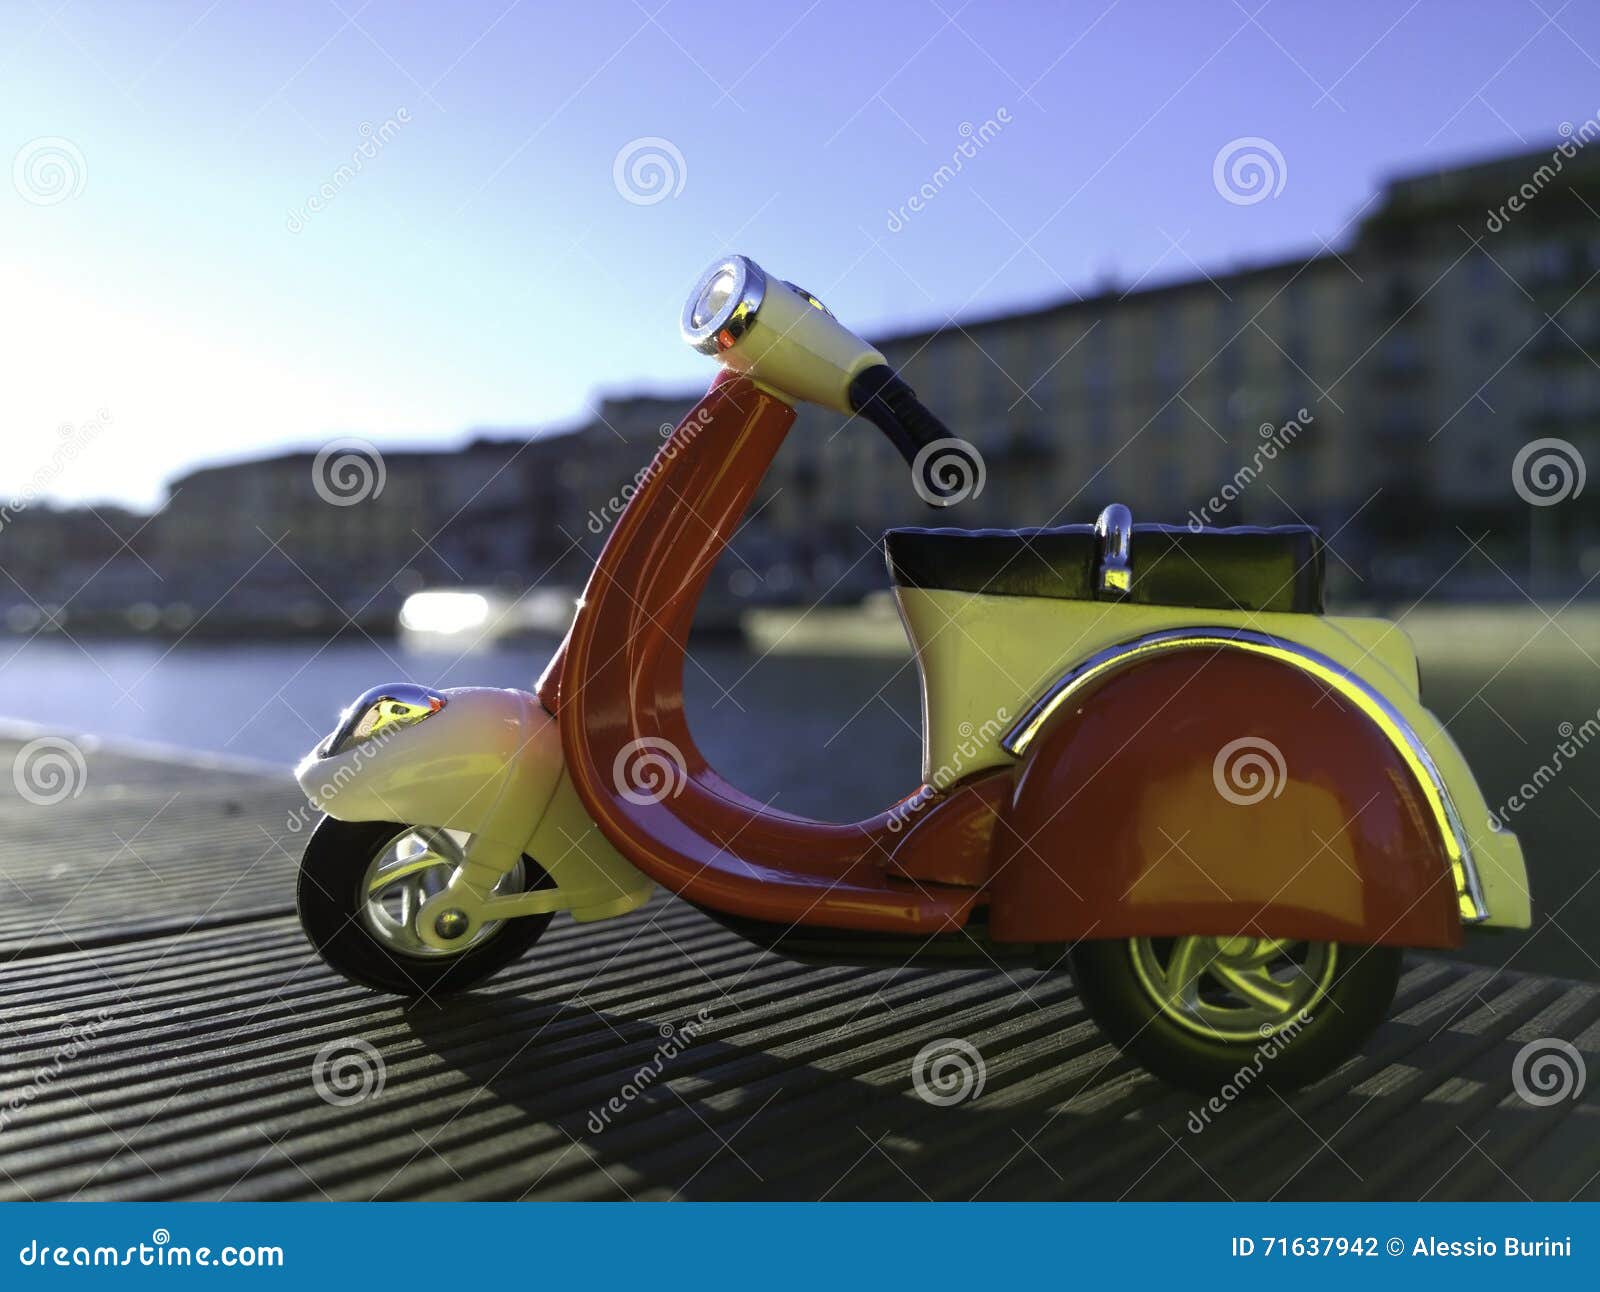 red vespa model parked on the side of darsena pier in milan italy